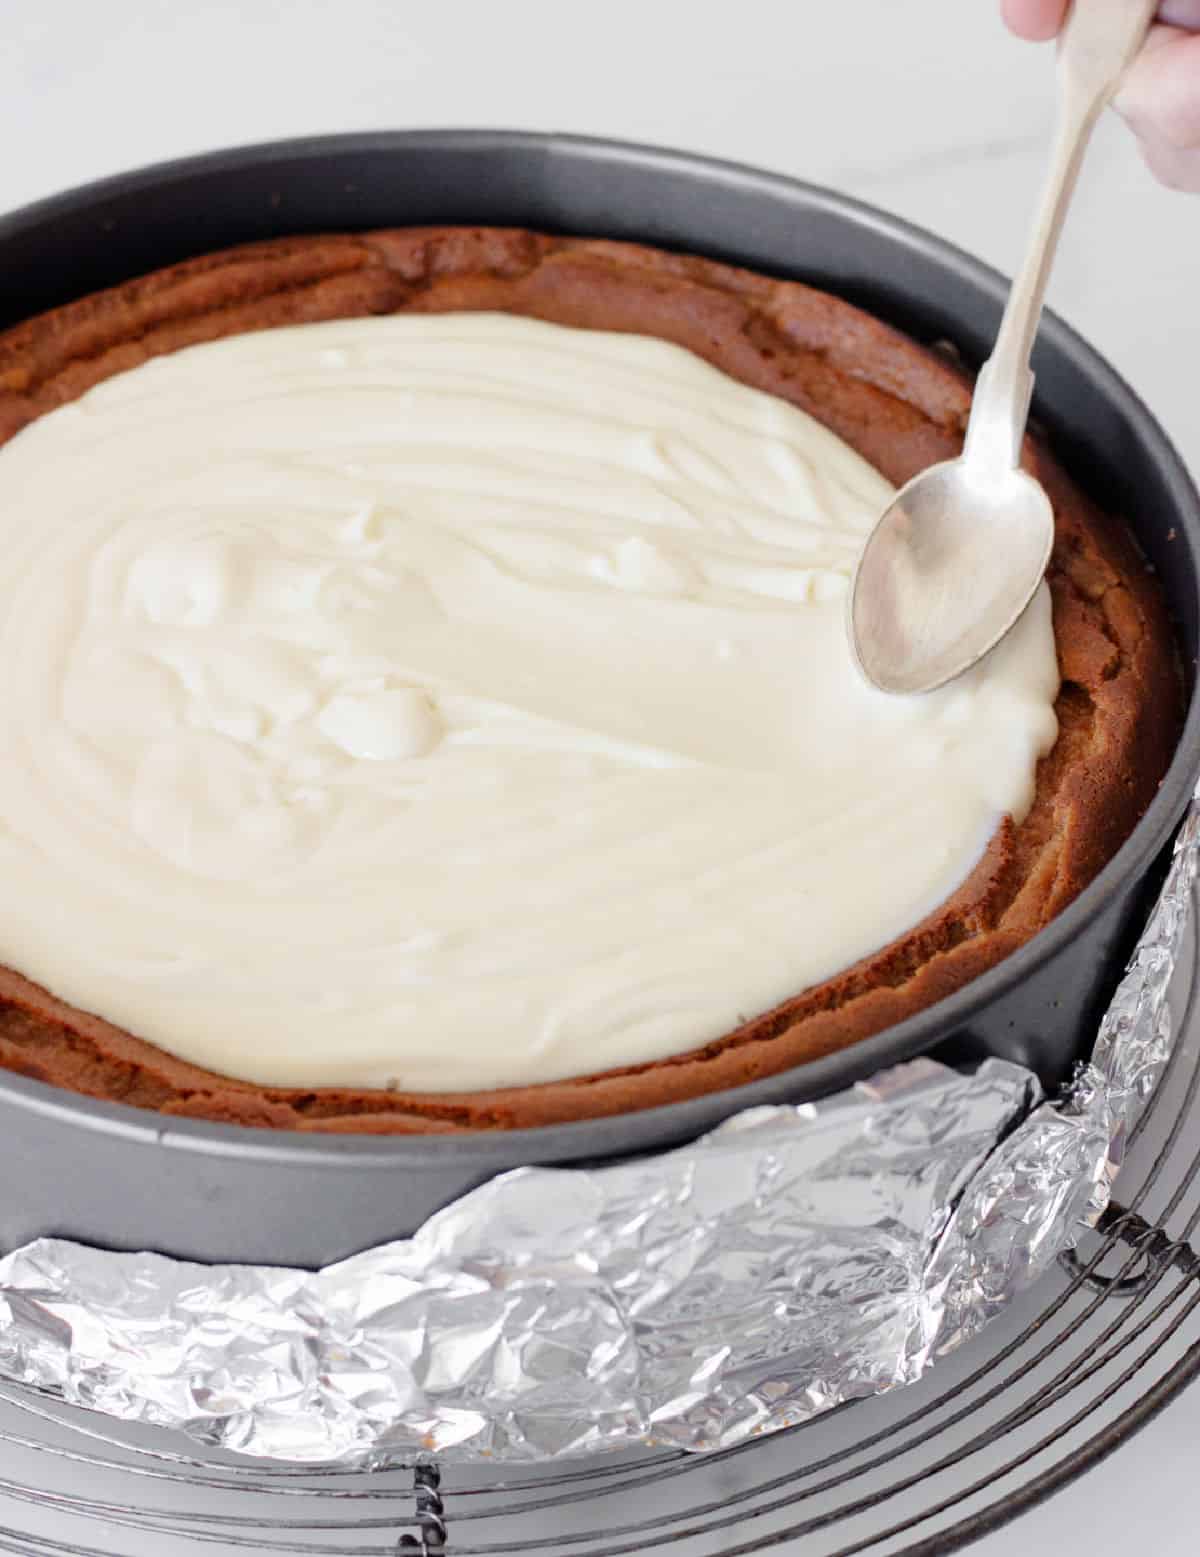 Spreading sour cream topping with a silver spoon on top of brown sugar cheesecake in the pan.